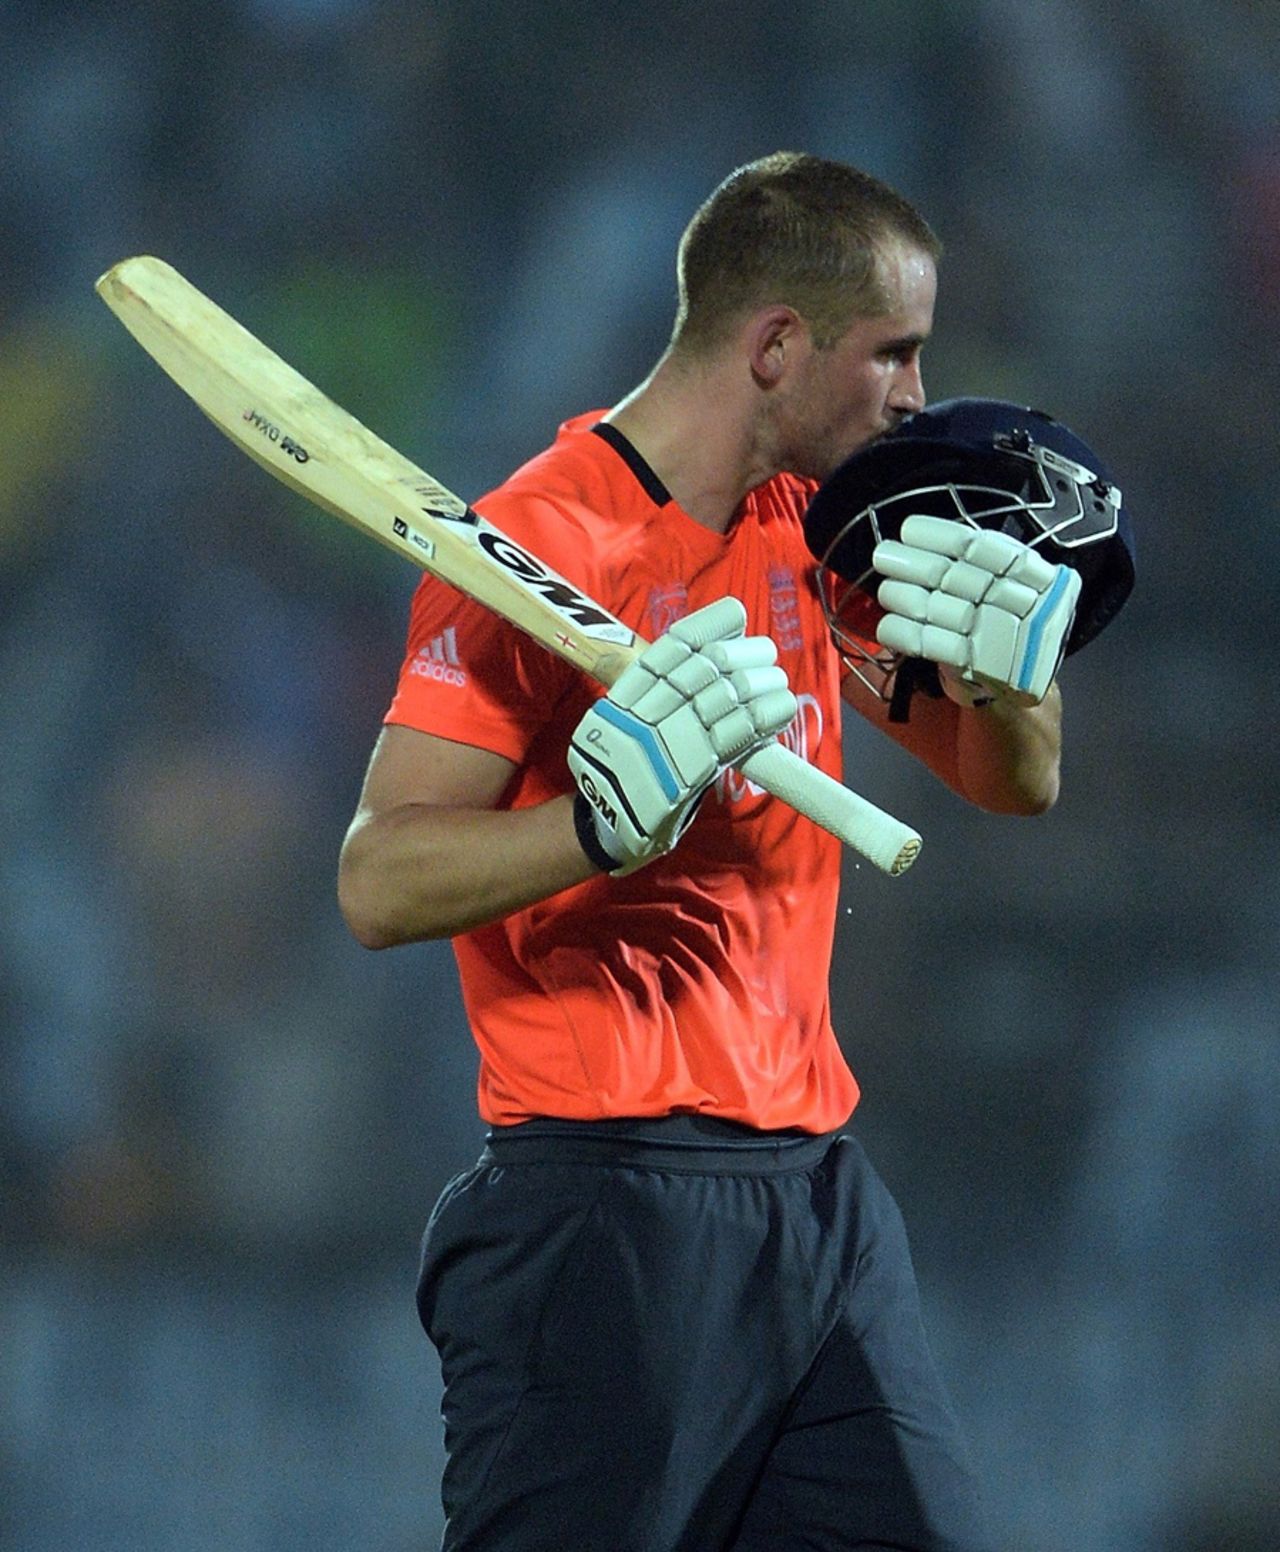 Alex Hales after reaching his hundred, England v Sri Lanka, World T20, Group 1, Chittagong, March, 27, 2014